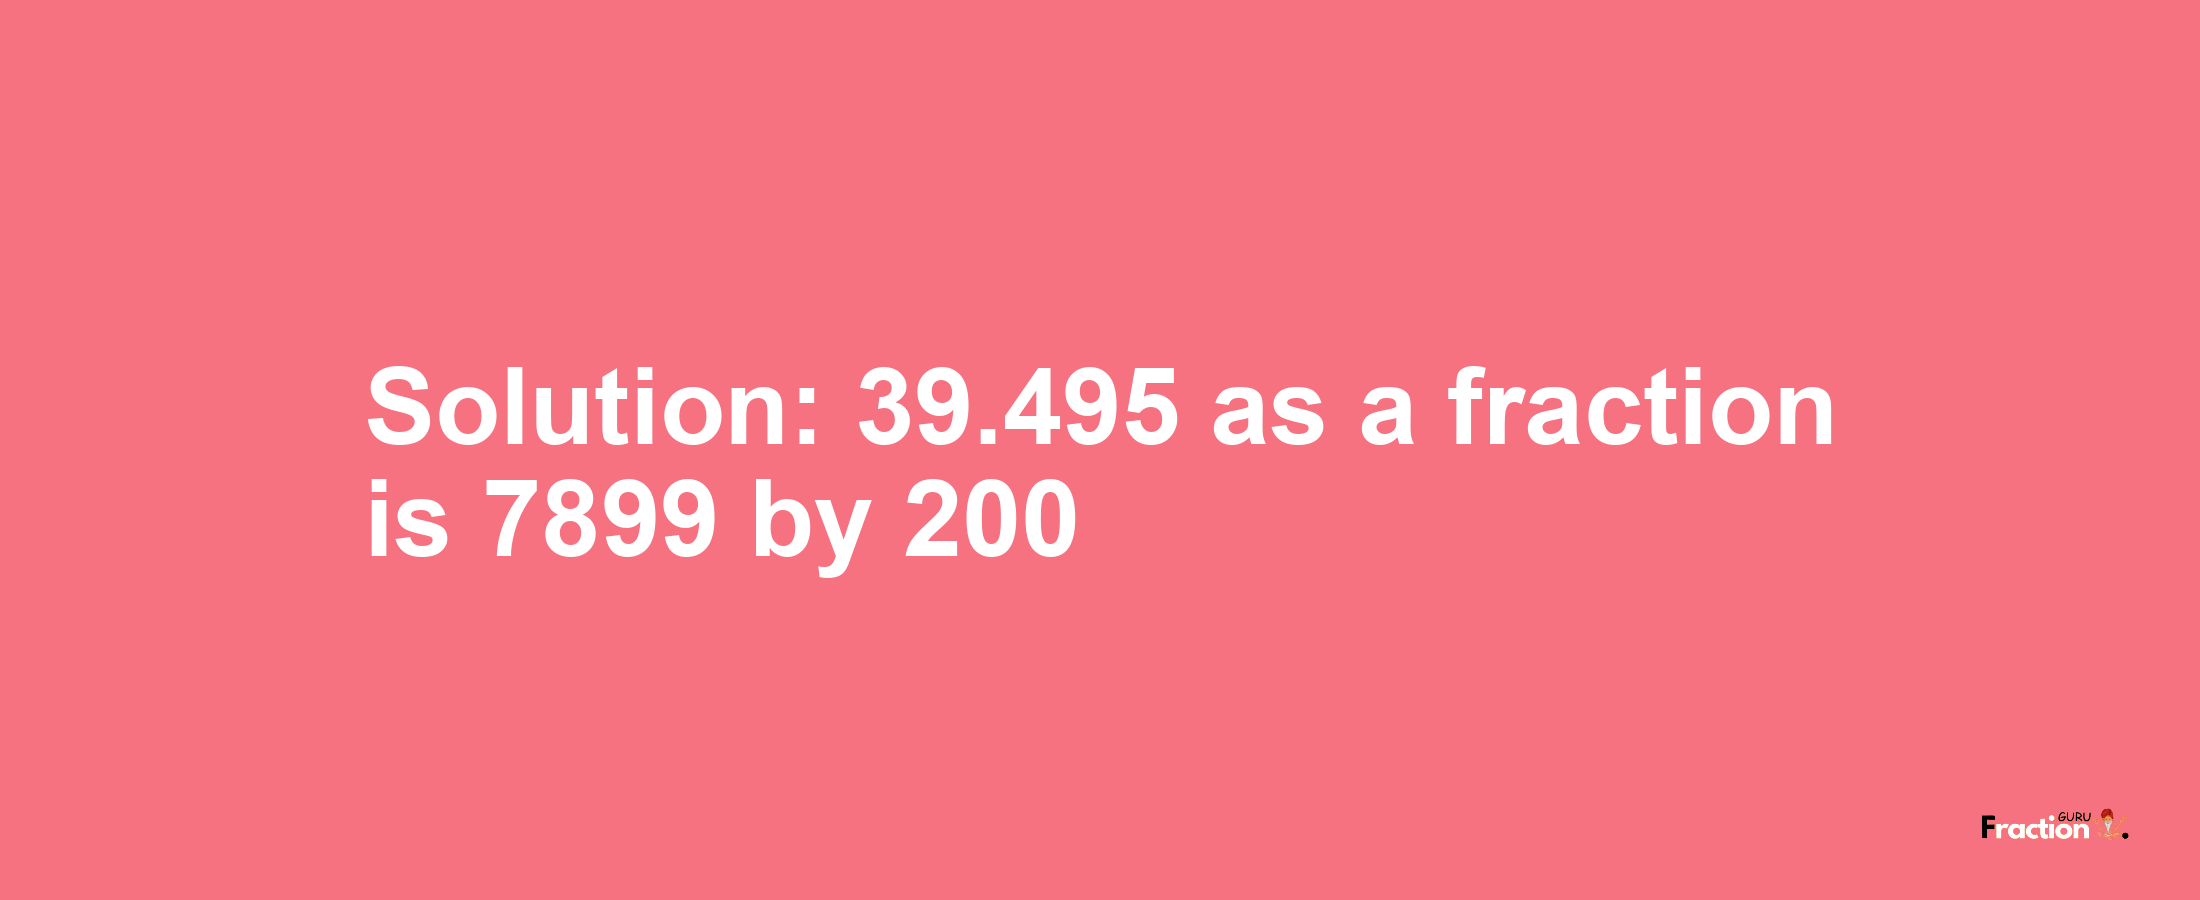 Solution:39.495 as a fraction is 7899/200